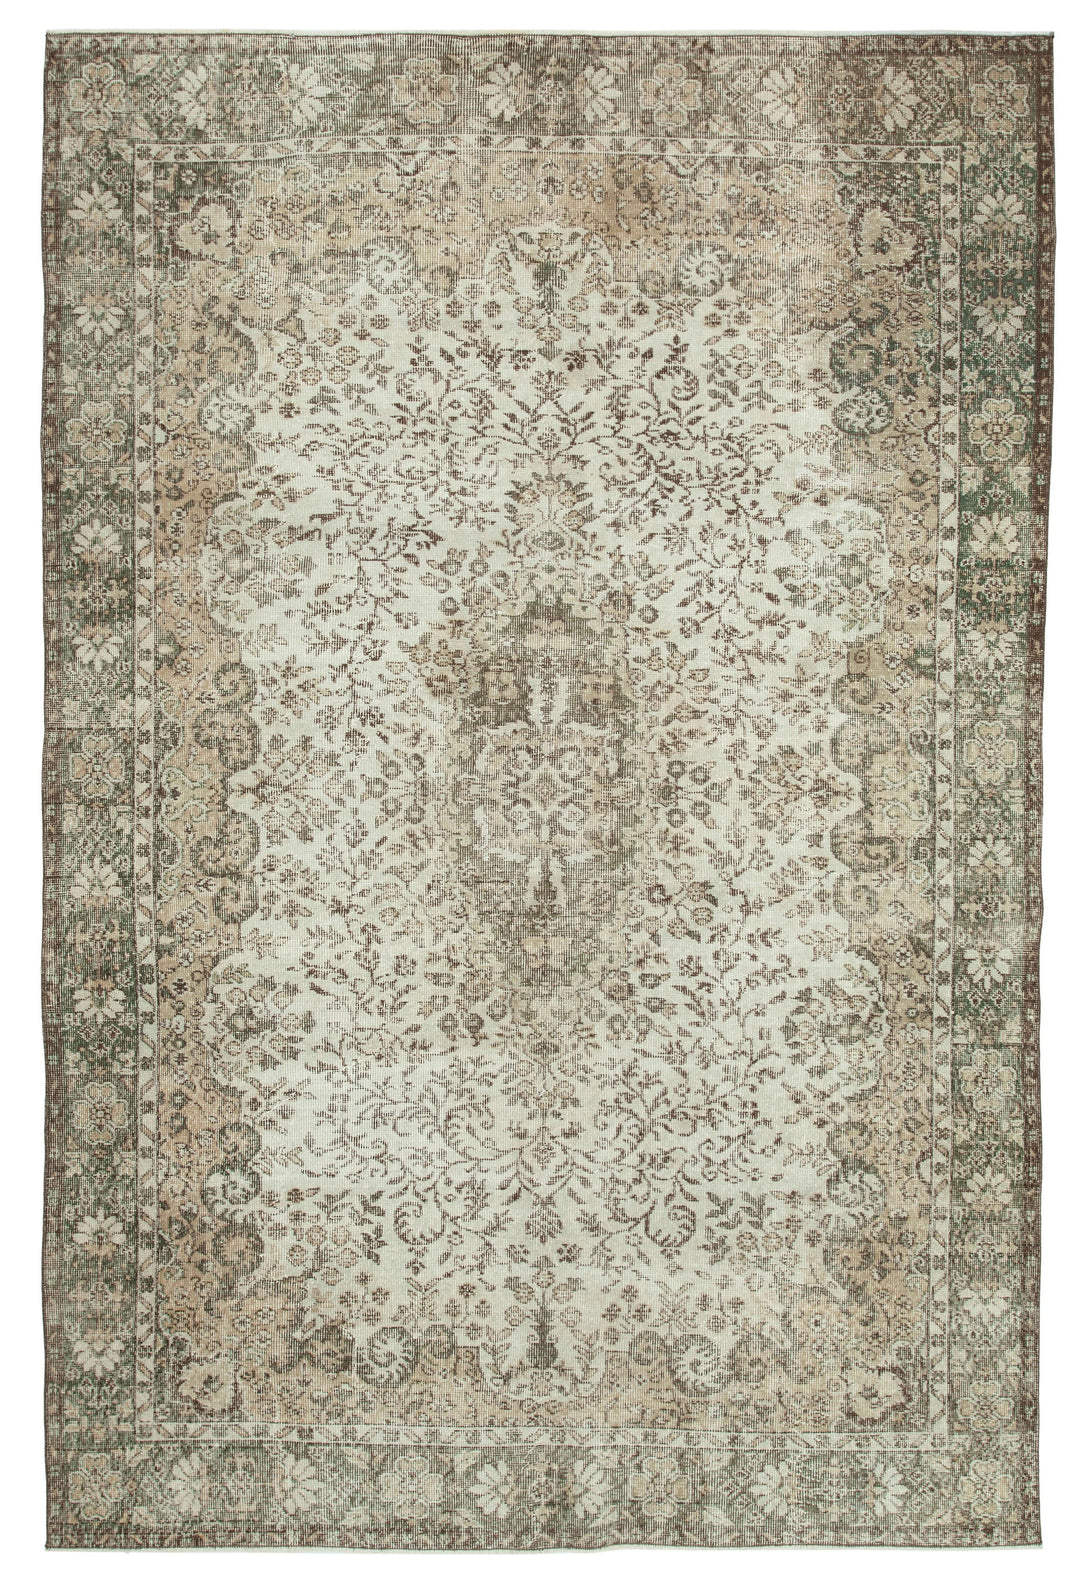 Handmade White Wash Area Rug > Design# OL-AC-34130 > Size: 6'-9" x 10'-1", Carpet Culture Rugs, Handmade Rugs, NYC Rugs, New Rugs, Shop Rugs, Rug Store, Outlet Rugs, SoHo Rugs, Rugs in USA